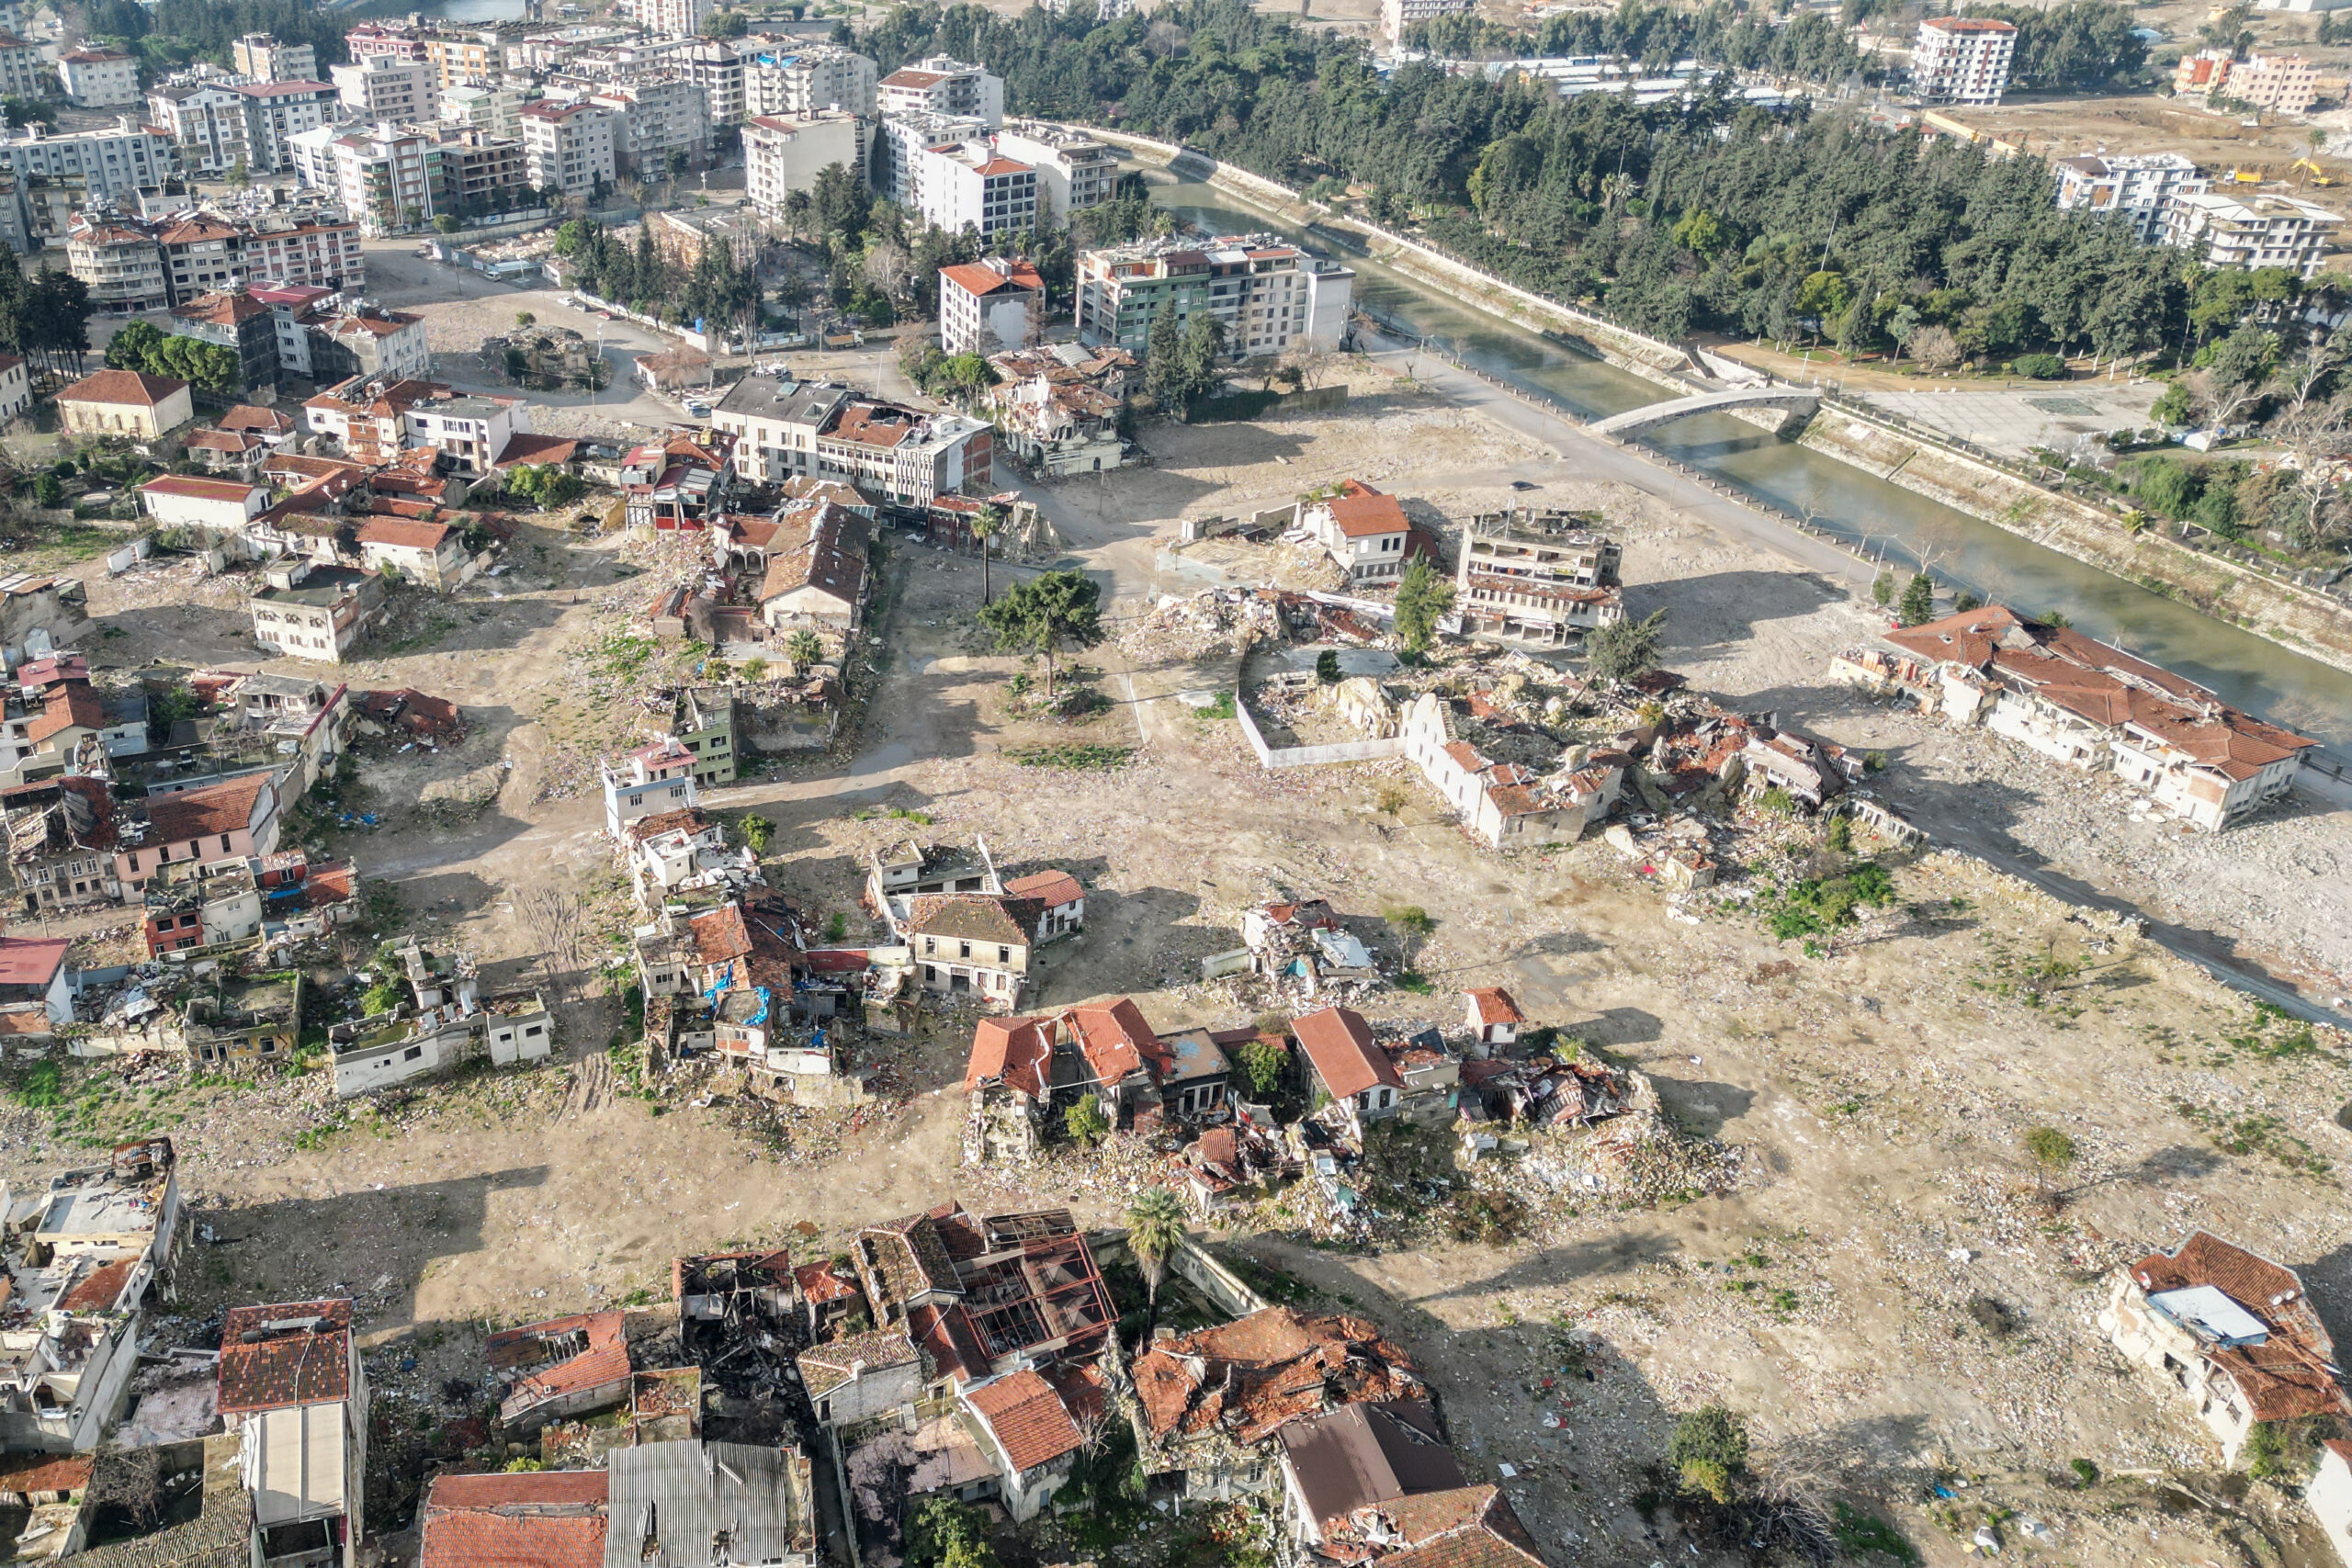 Image of an aerial view shows collapsed and damaged buildings in Hatay, Turkey almost a year after the February 6, 2023 earthquakes.